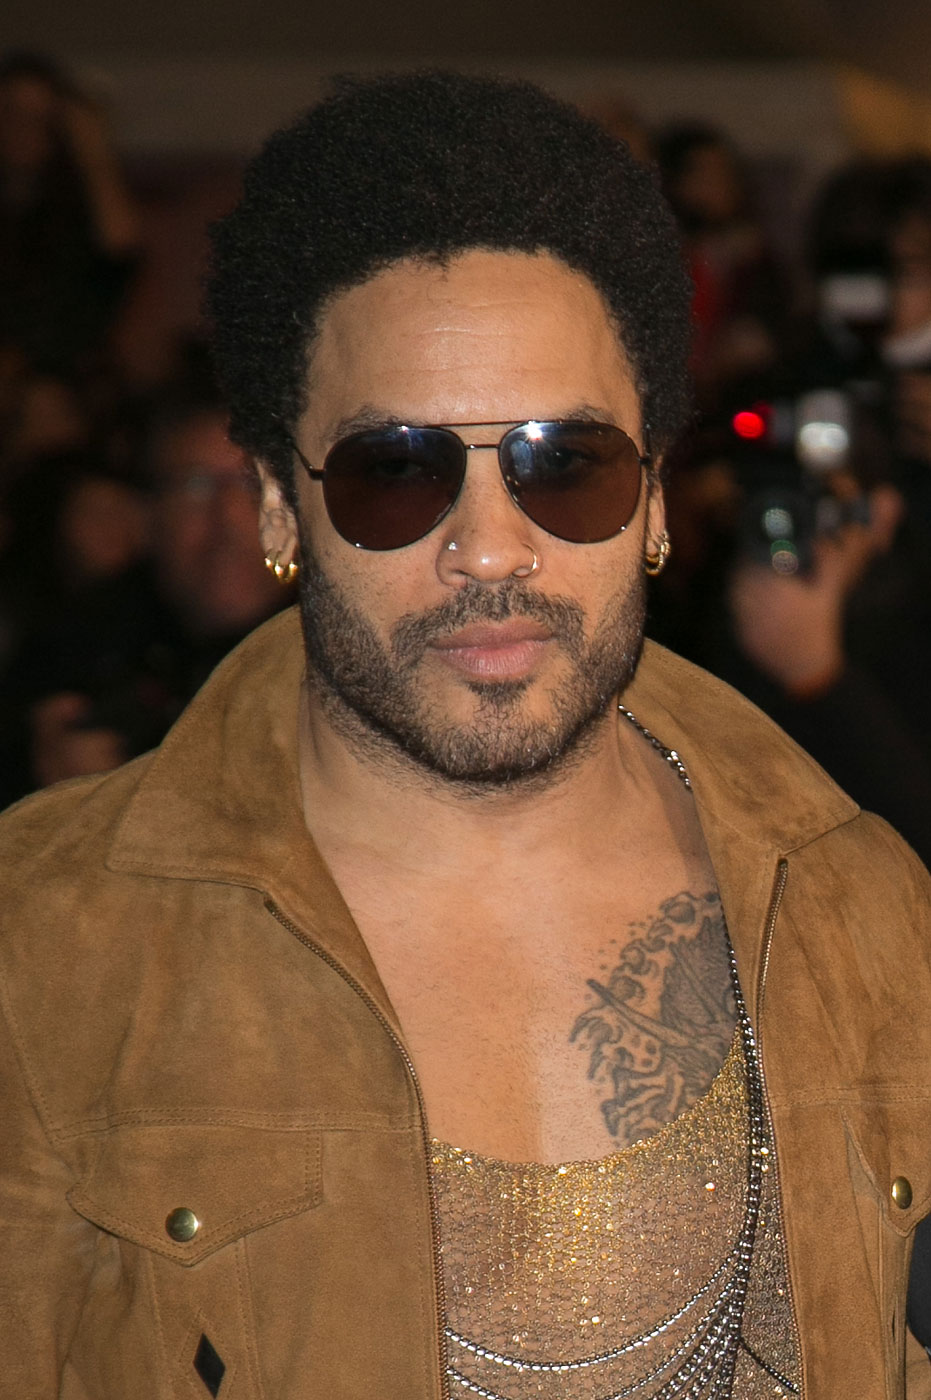 Lenny Kravitz attends the 16th NRJ Music Awards 2014 ceremony at Palais des Festivals on December 13, 2014 in Cannes, France. (Marc Piasecki—FilmMagic/Getty Images)